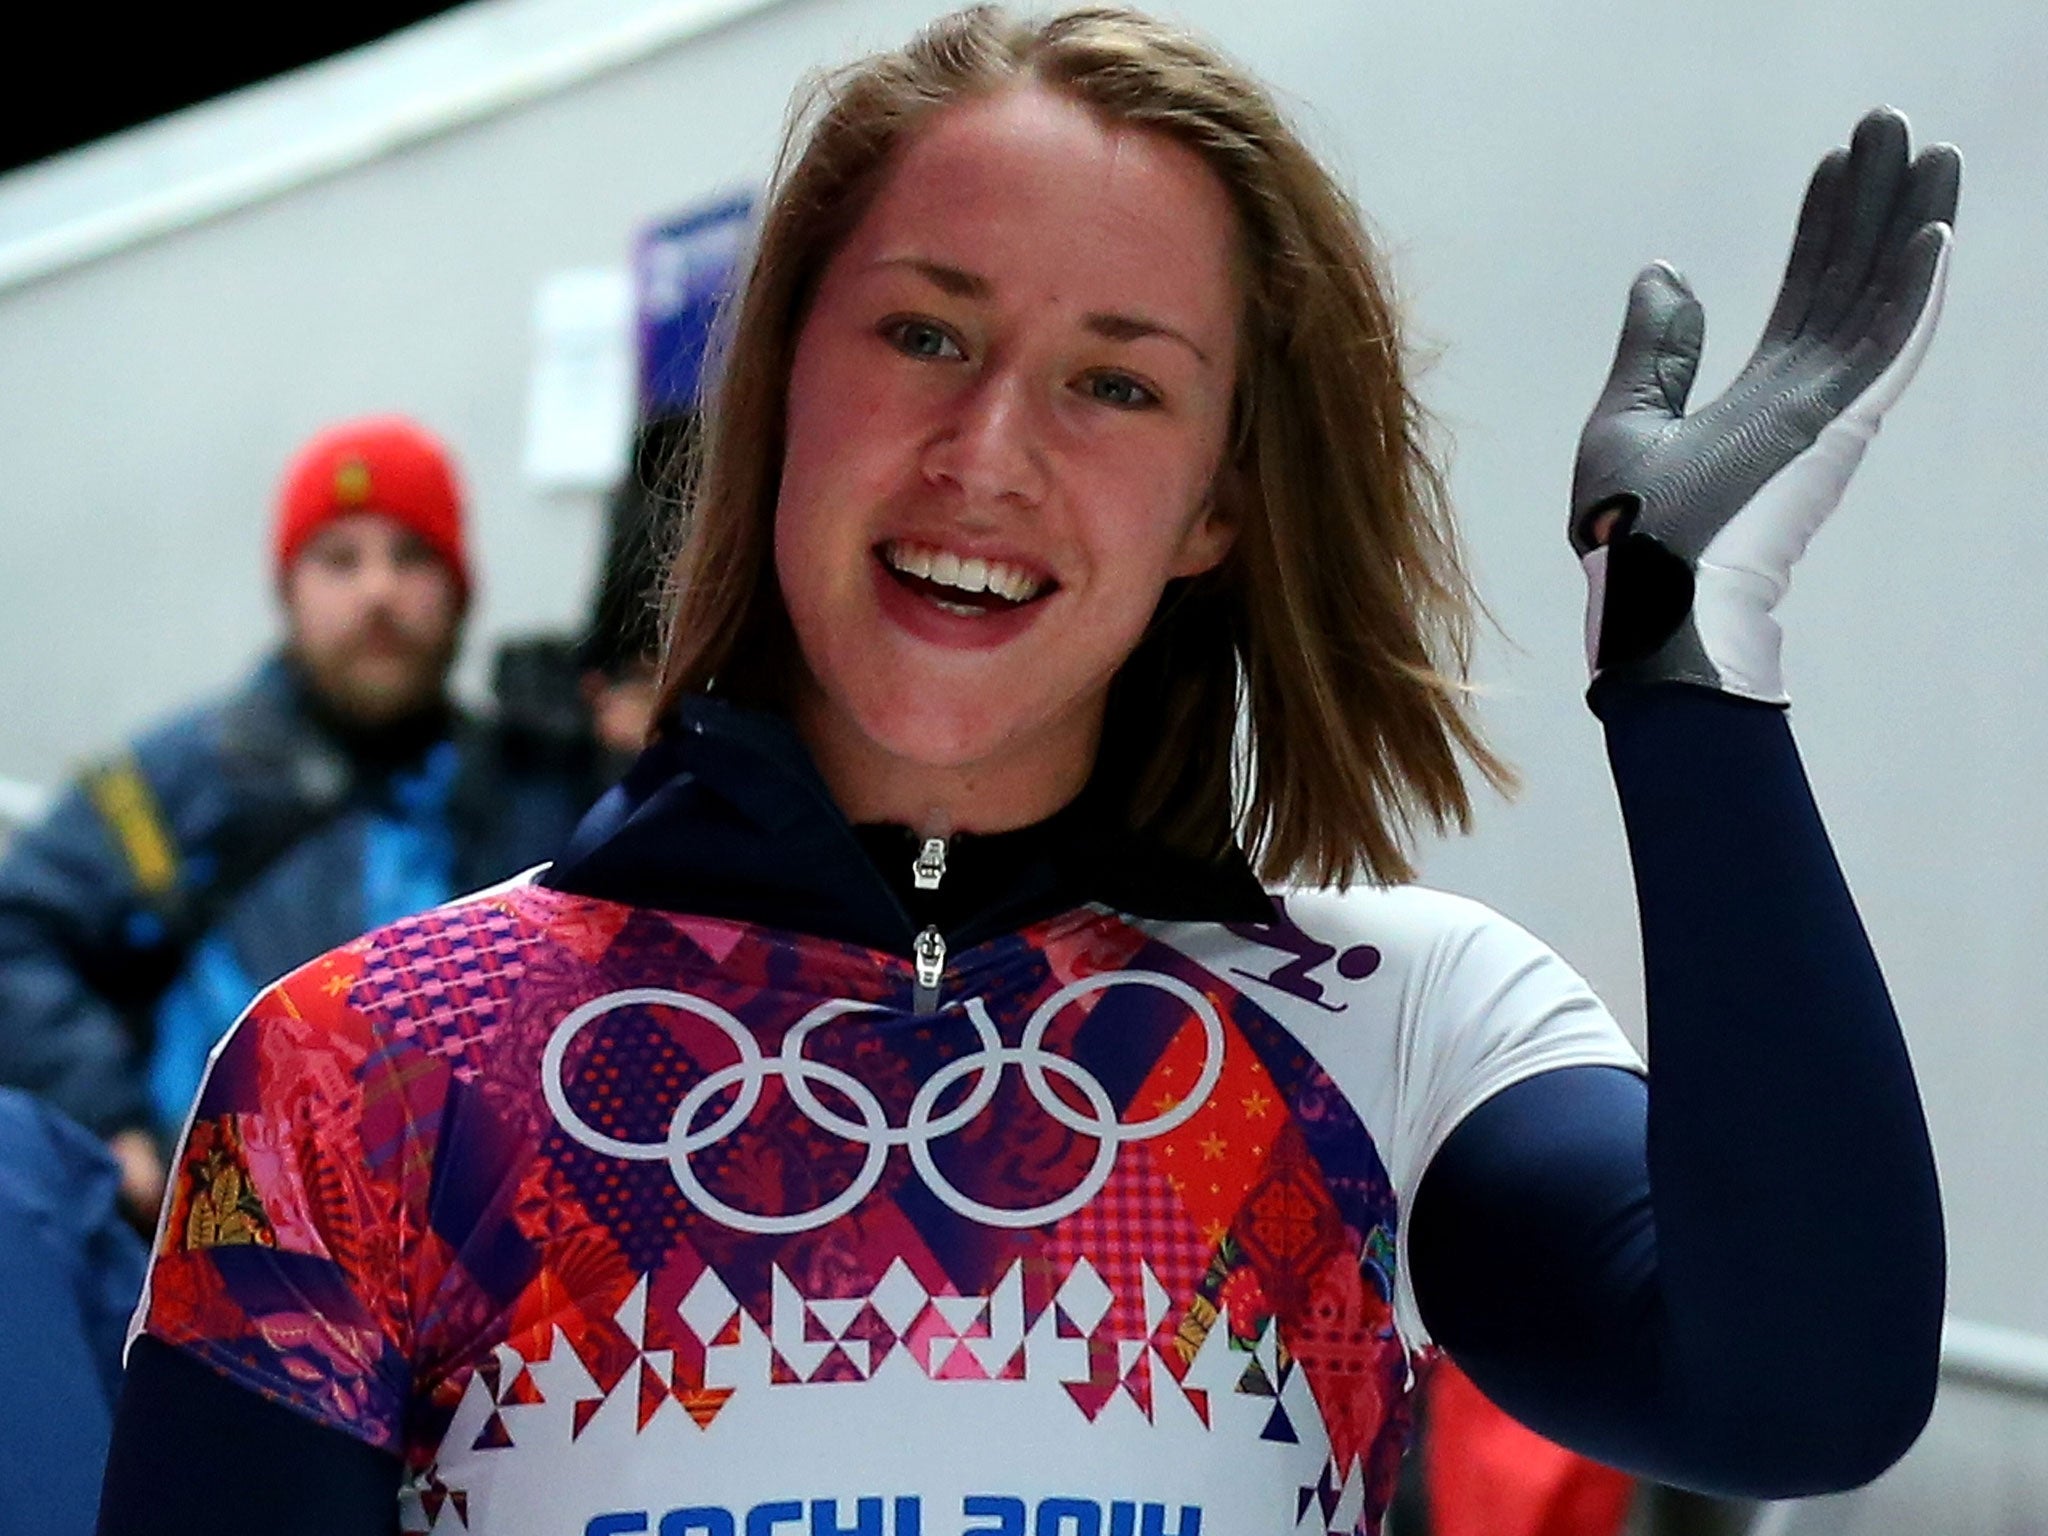 Lizzy Yarnold of Great Britain waves to fans after competing her third run during the Women's Skeleton today